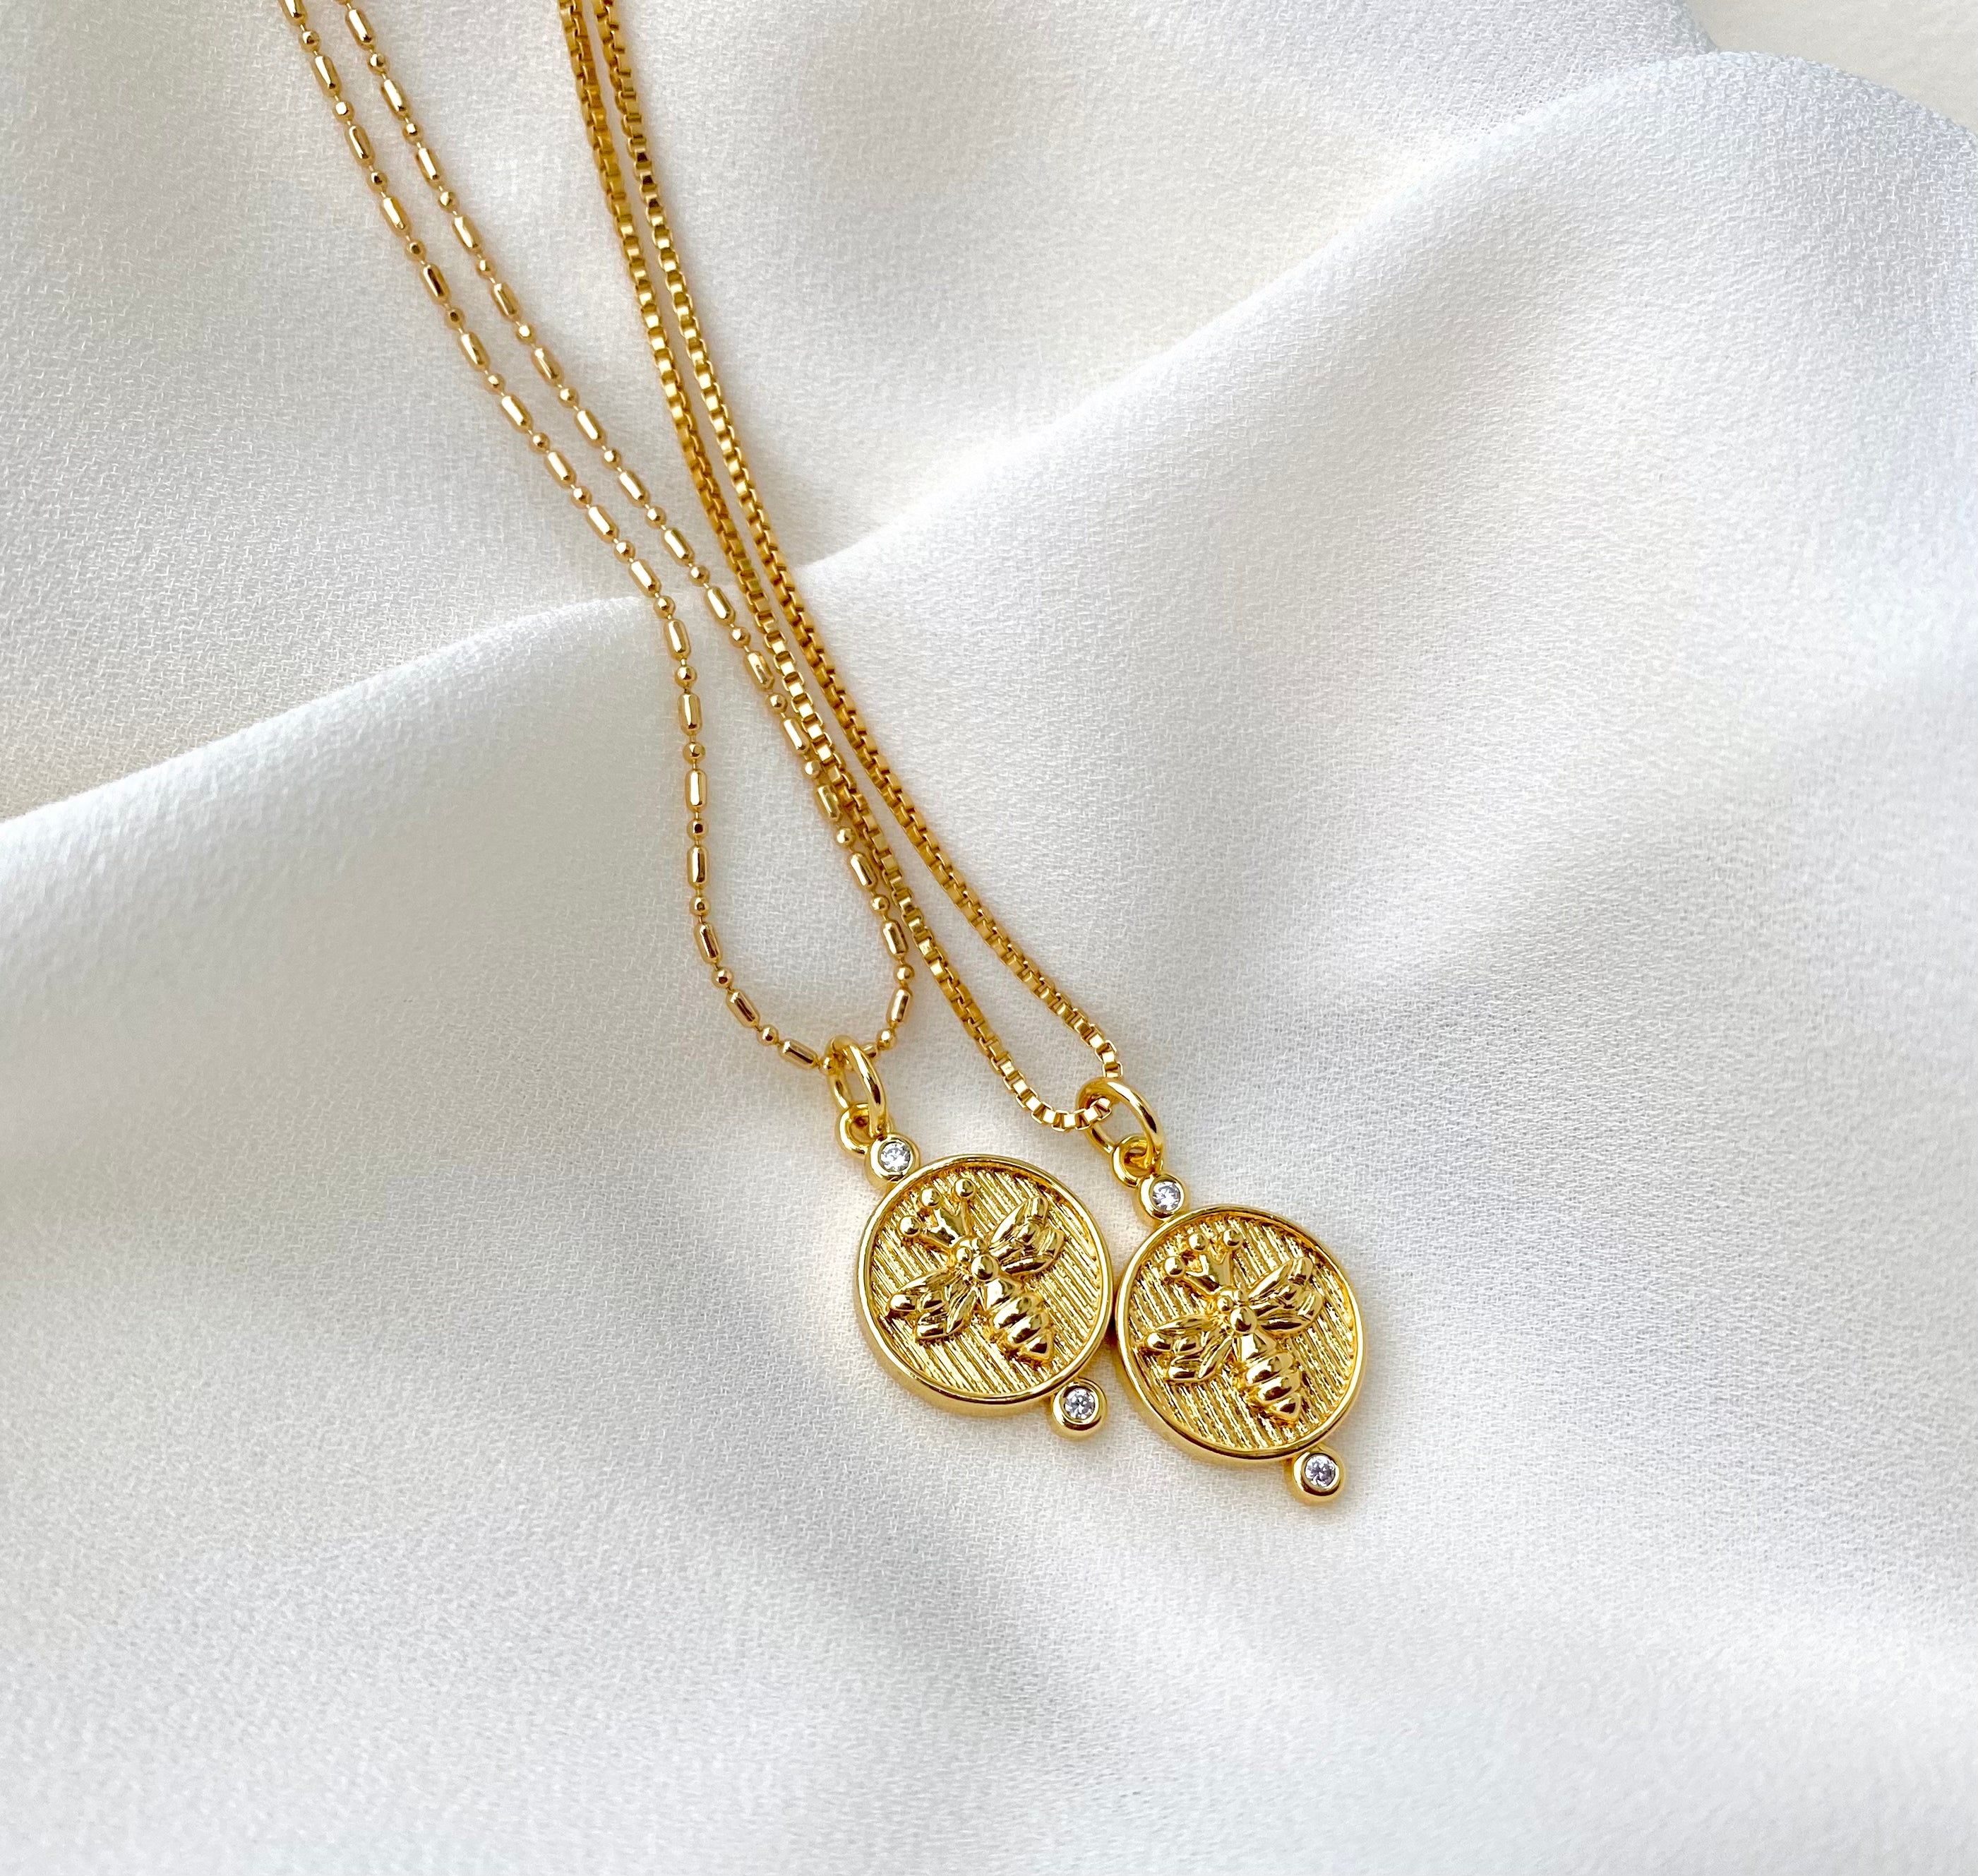 Gold Bee Necklace Gold Filled Necklace Gold Honey Bee Medallion Necklace Bumblebee Coin Pendant Rustic Coin Queen Bee Charm Christmas Gift